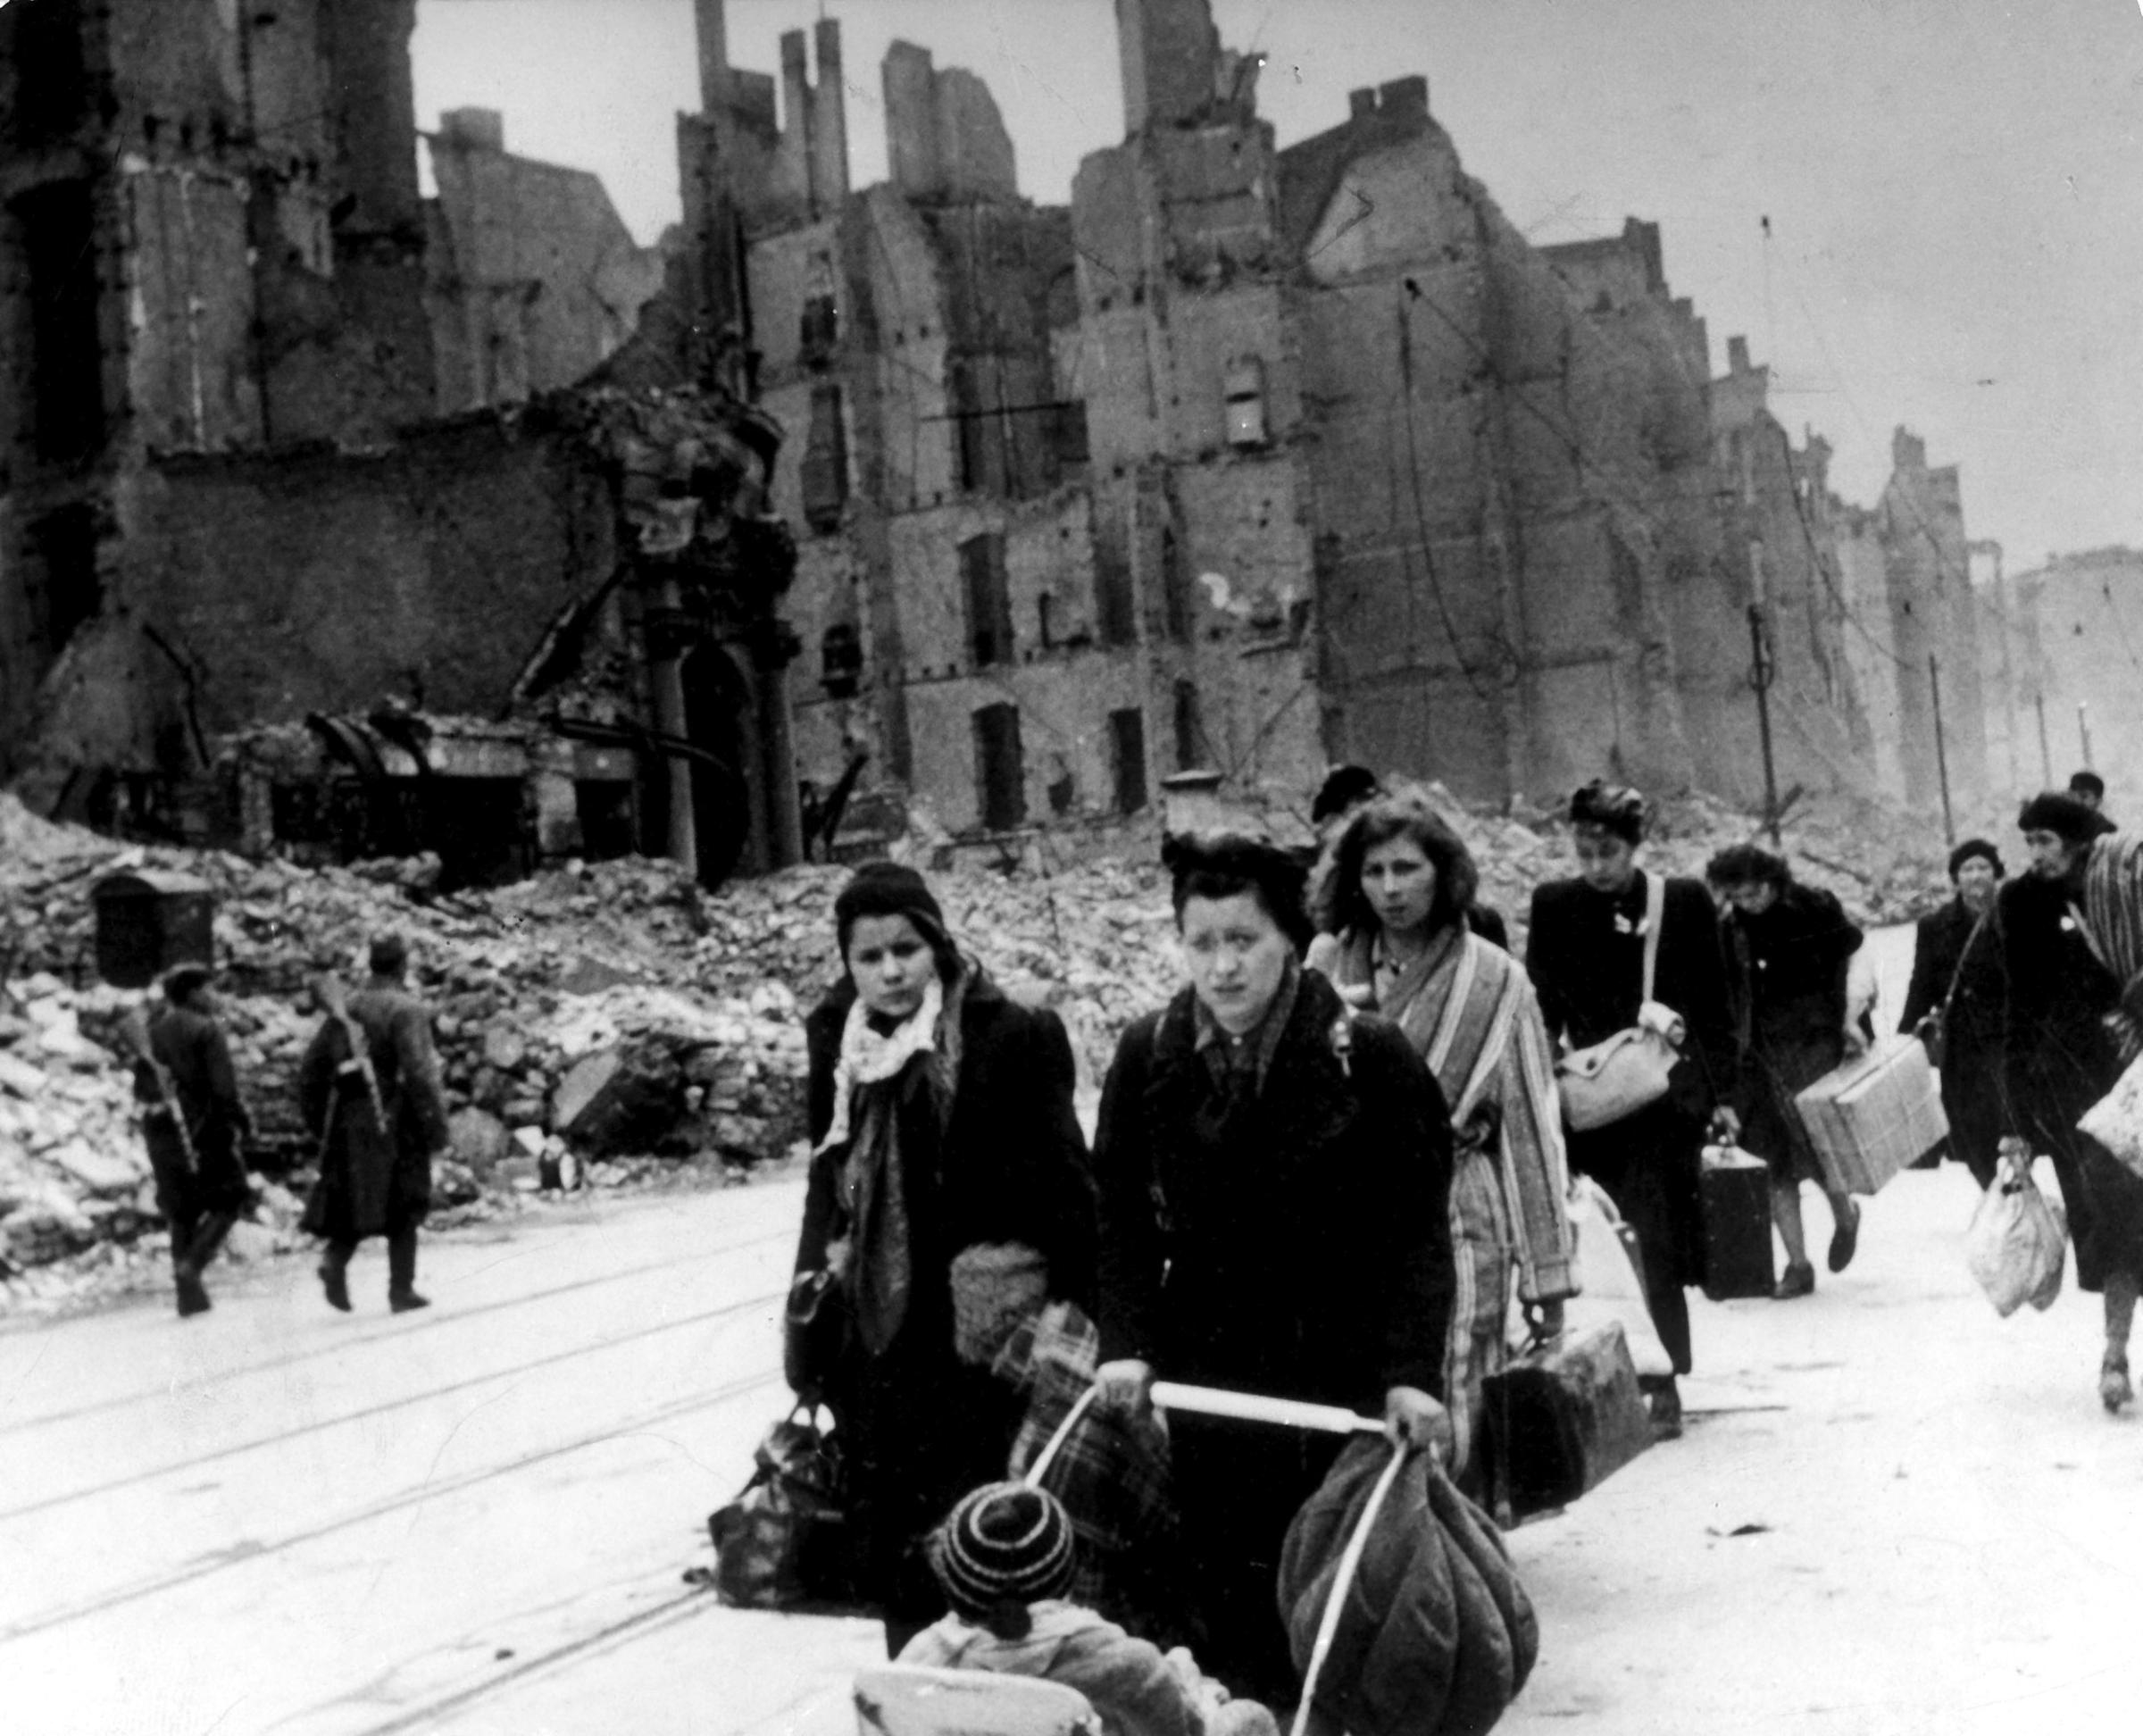 Stream of refugees and people who have been bombed out of their homes moving through destroyed streets - 1945after end of war; on the left two soviet soldiers patrolling).